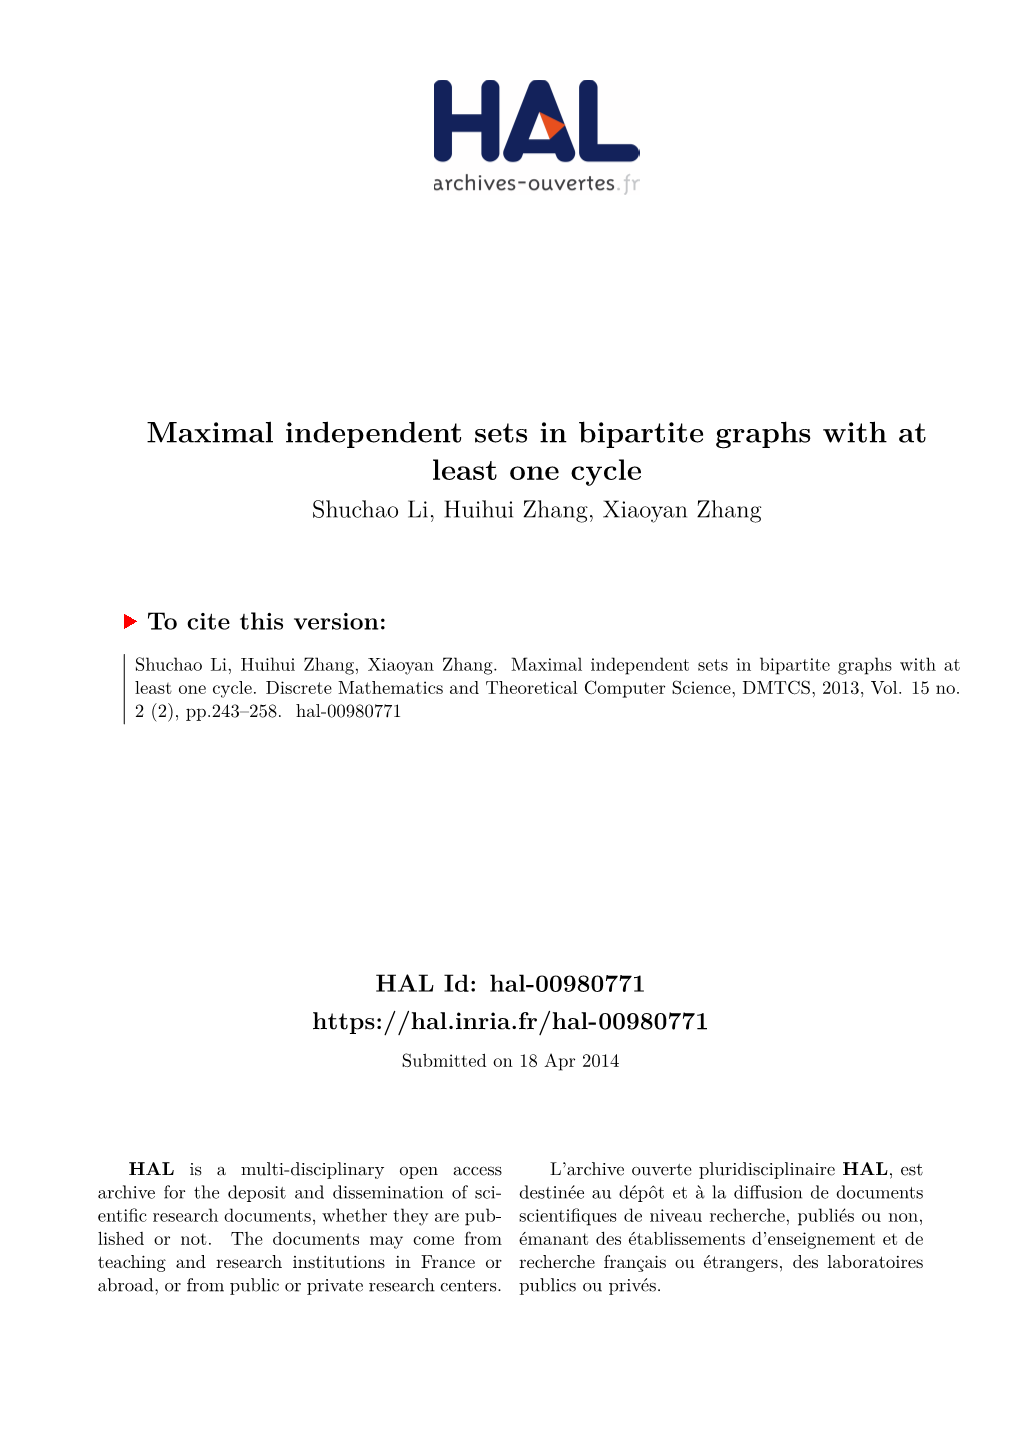 Maximal Independent Sets in Bipartite Graphs with at Least One Cycle Shuchao Li, Huihui Zhang, Xiaoyan Zhang